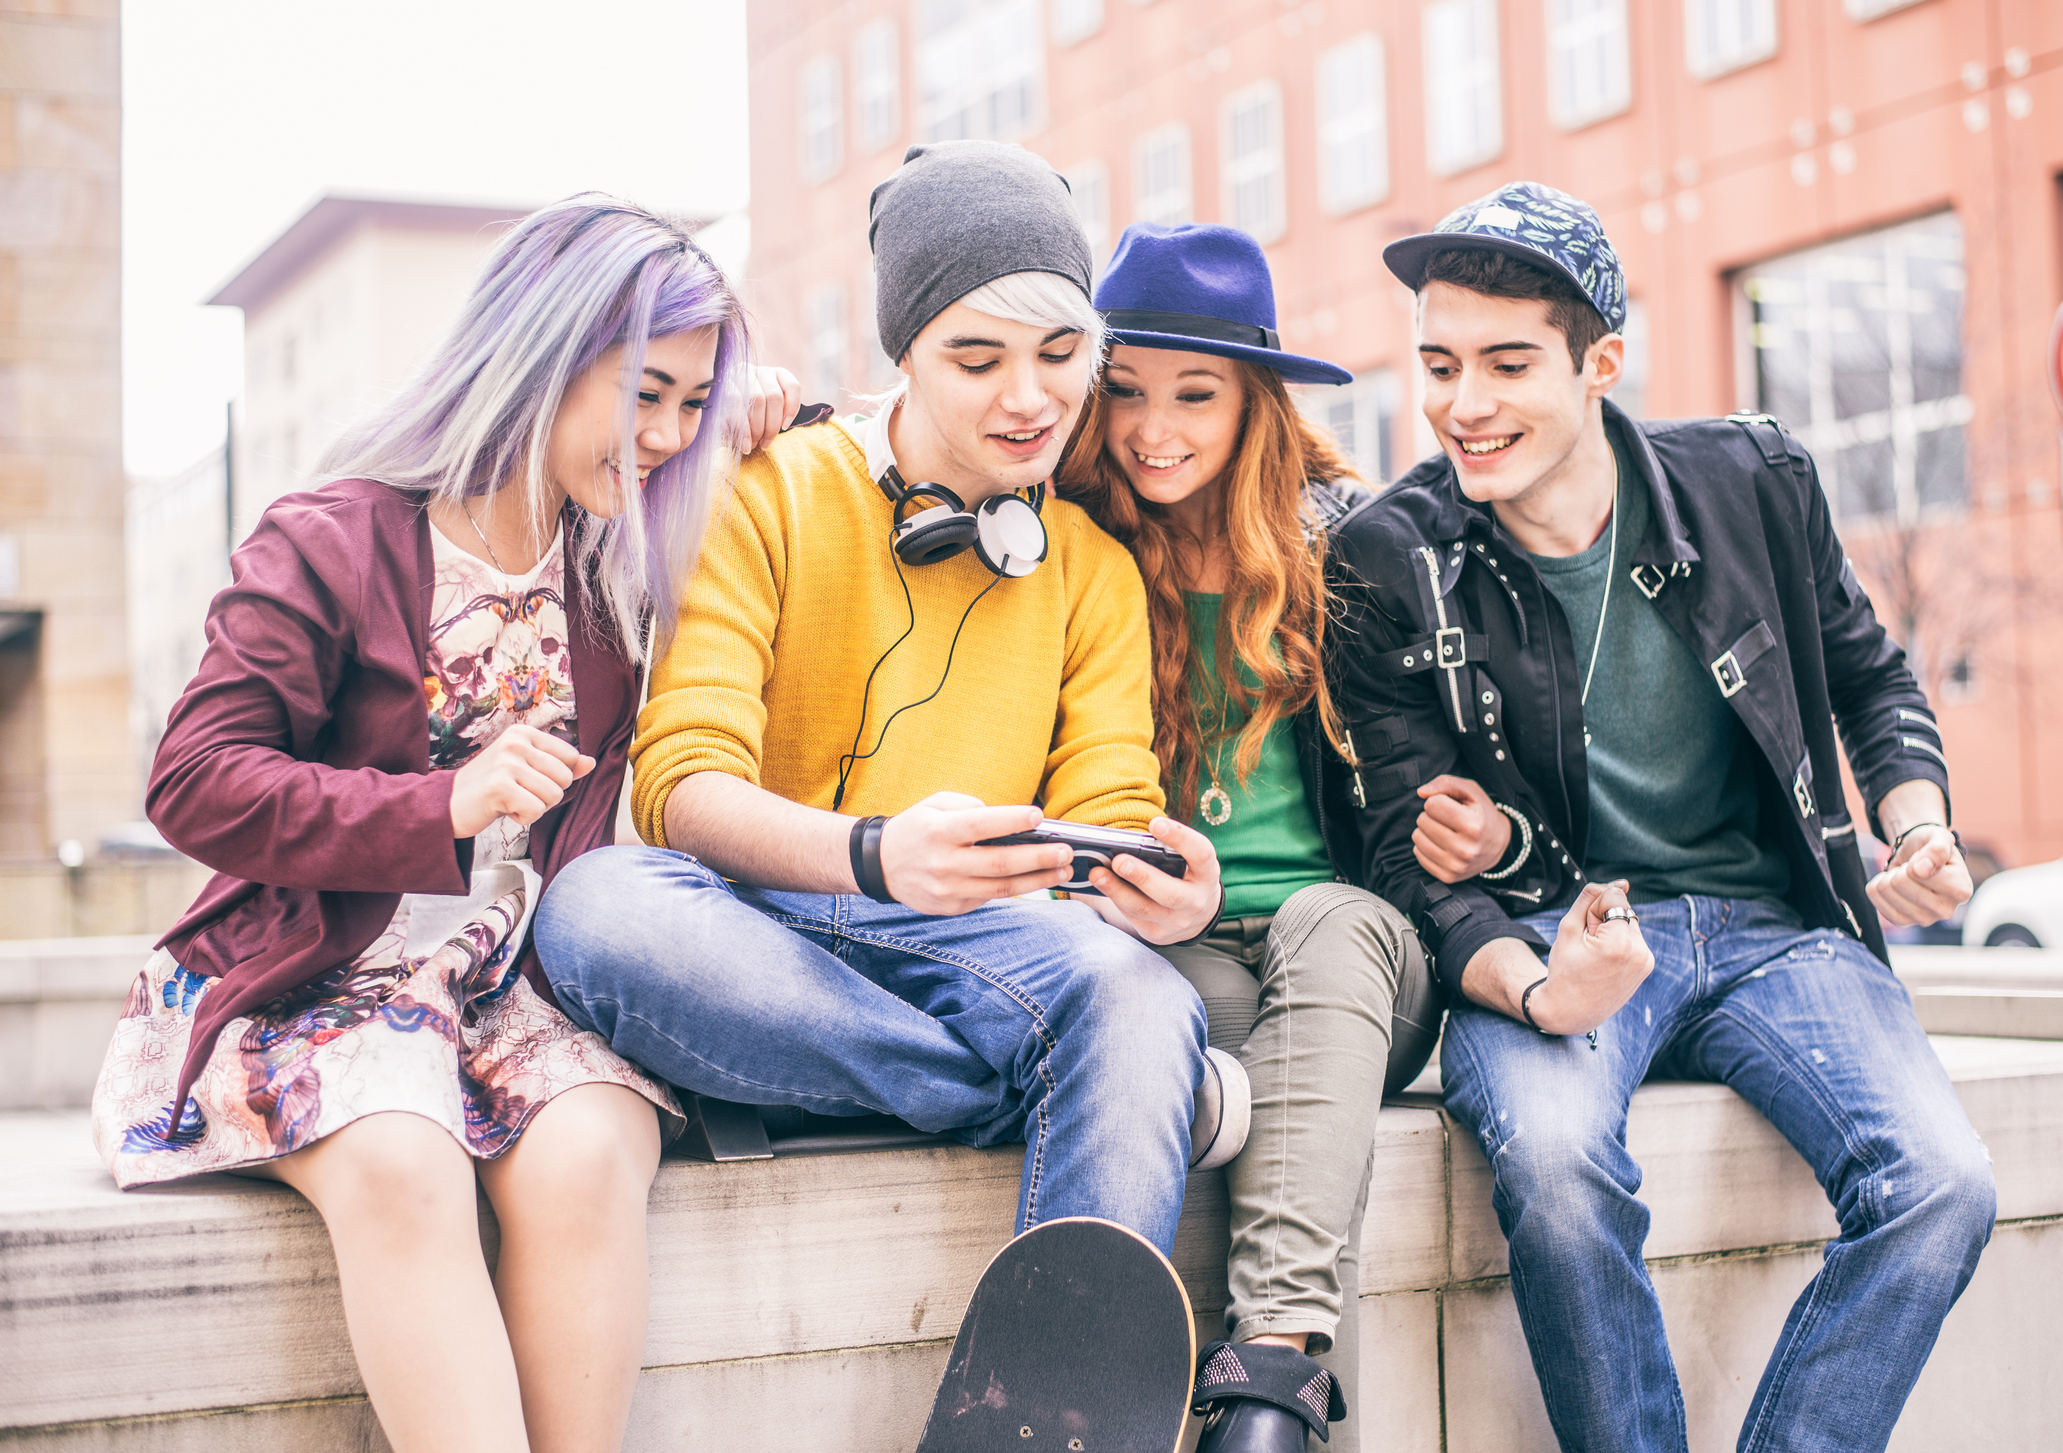 Group of young teens playing videogames outdoors - Cool teenagers hanging out in a university campus